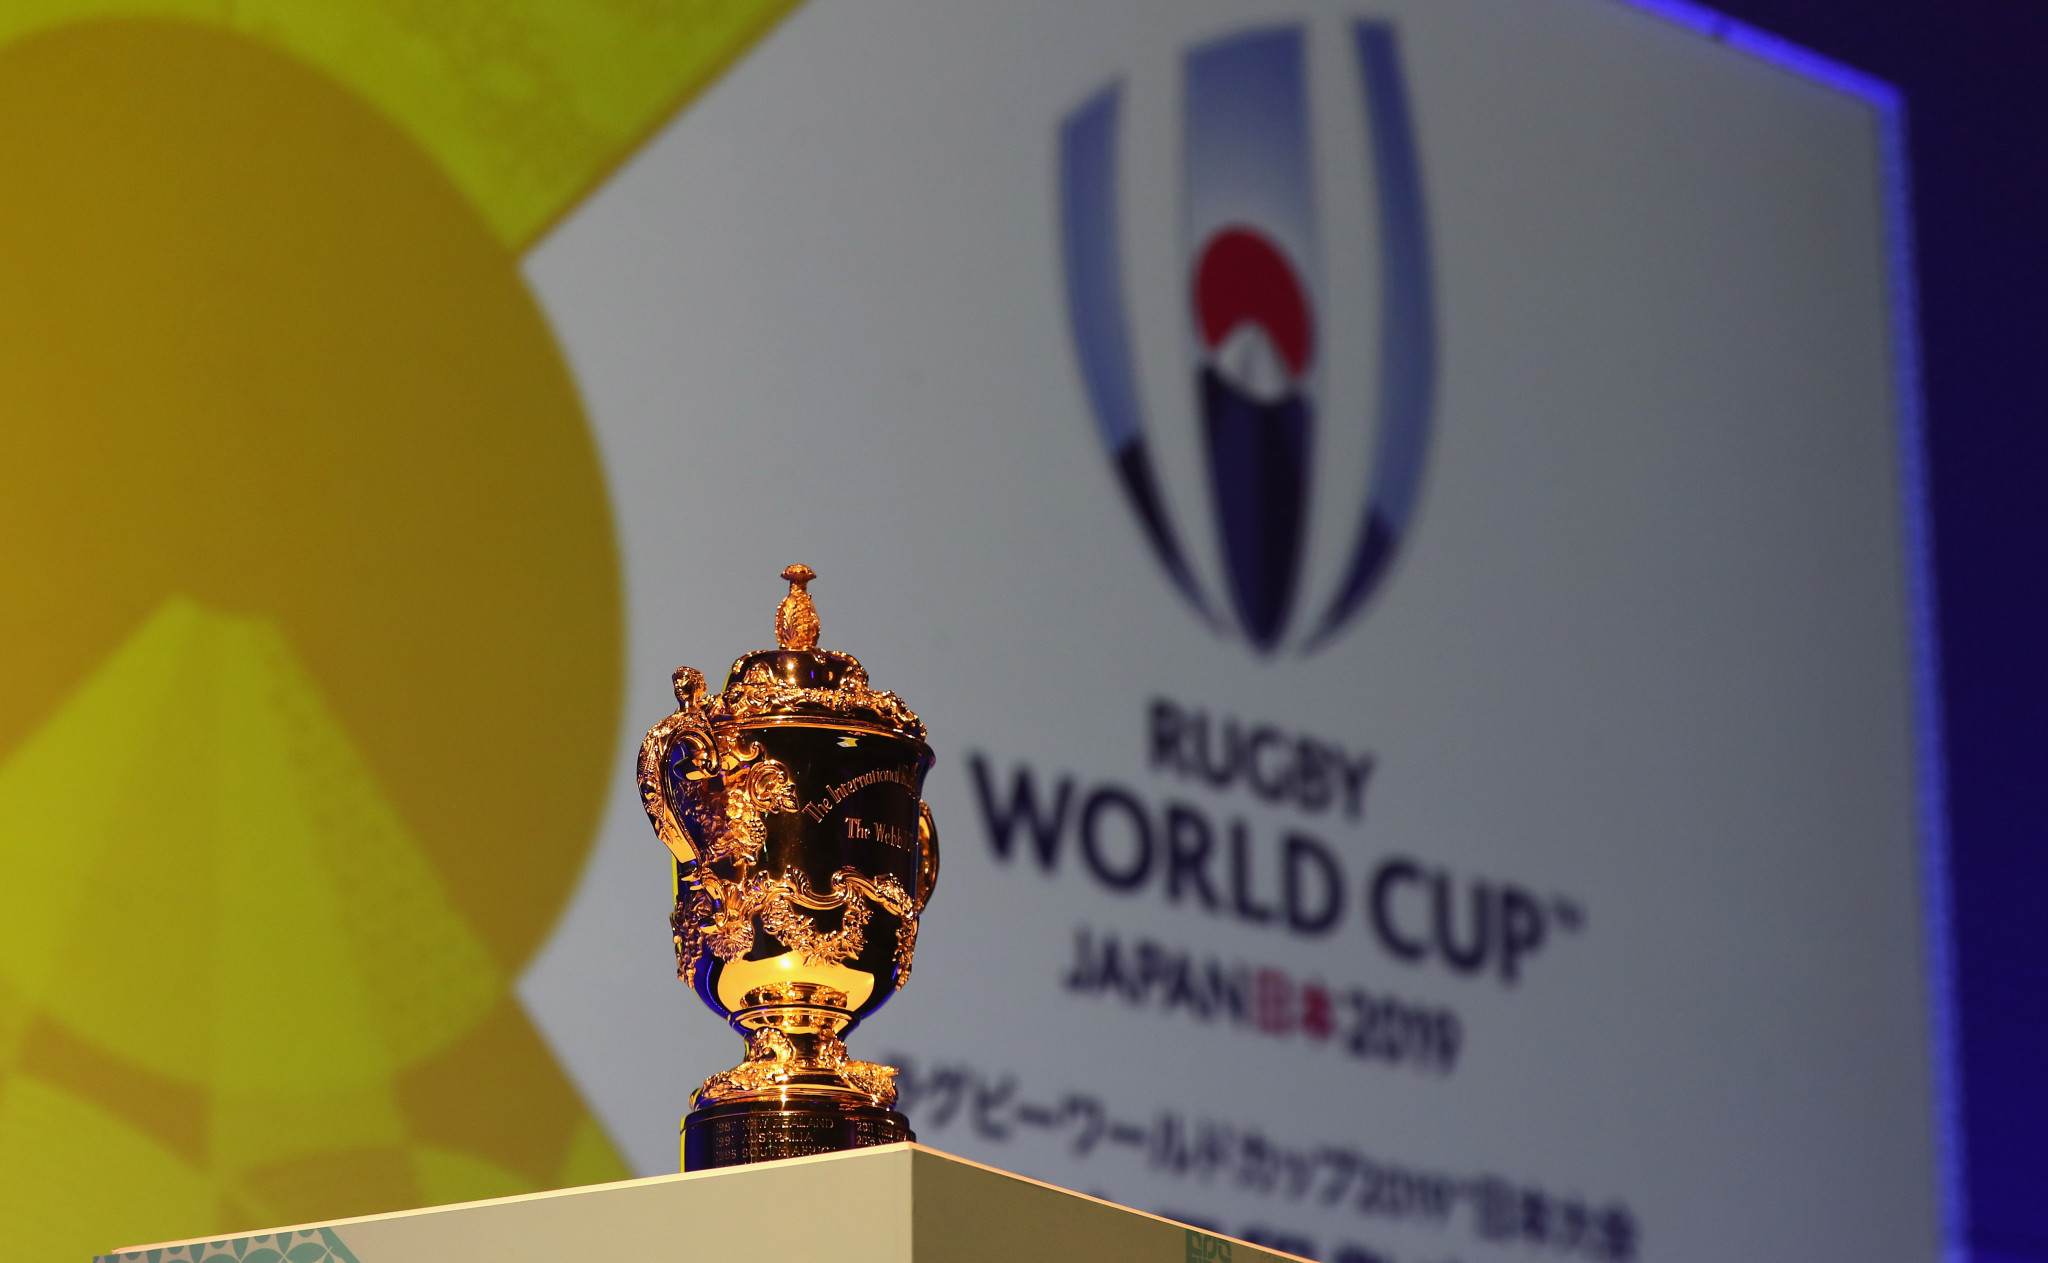 World Rugby have claimed there is a strong demand for tickets for the Japan 2019 Rugby World Cup ©Getty Images